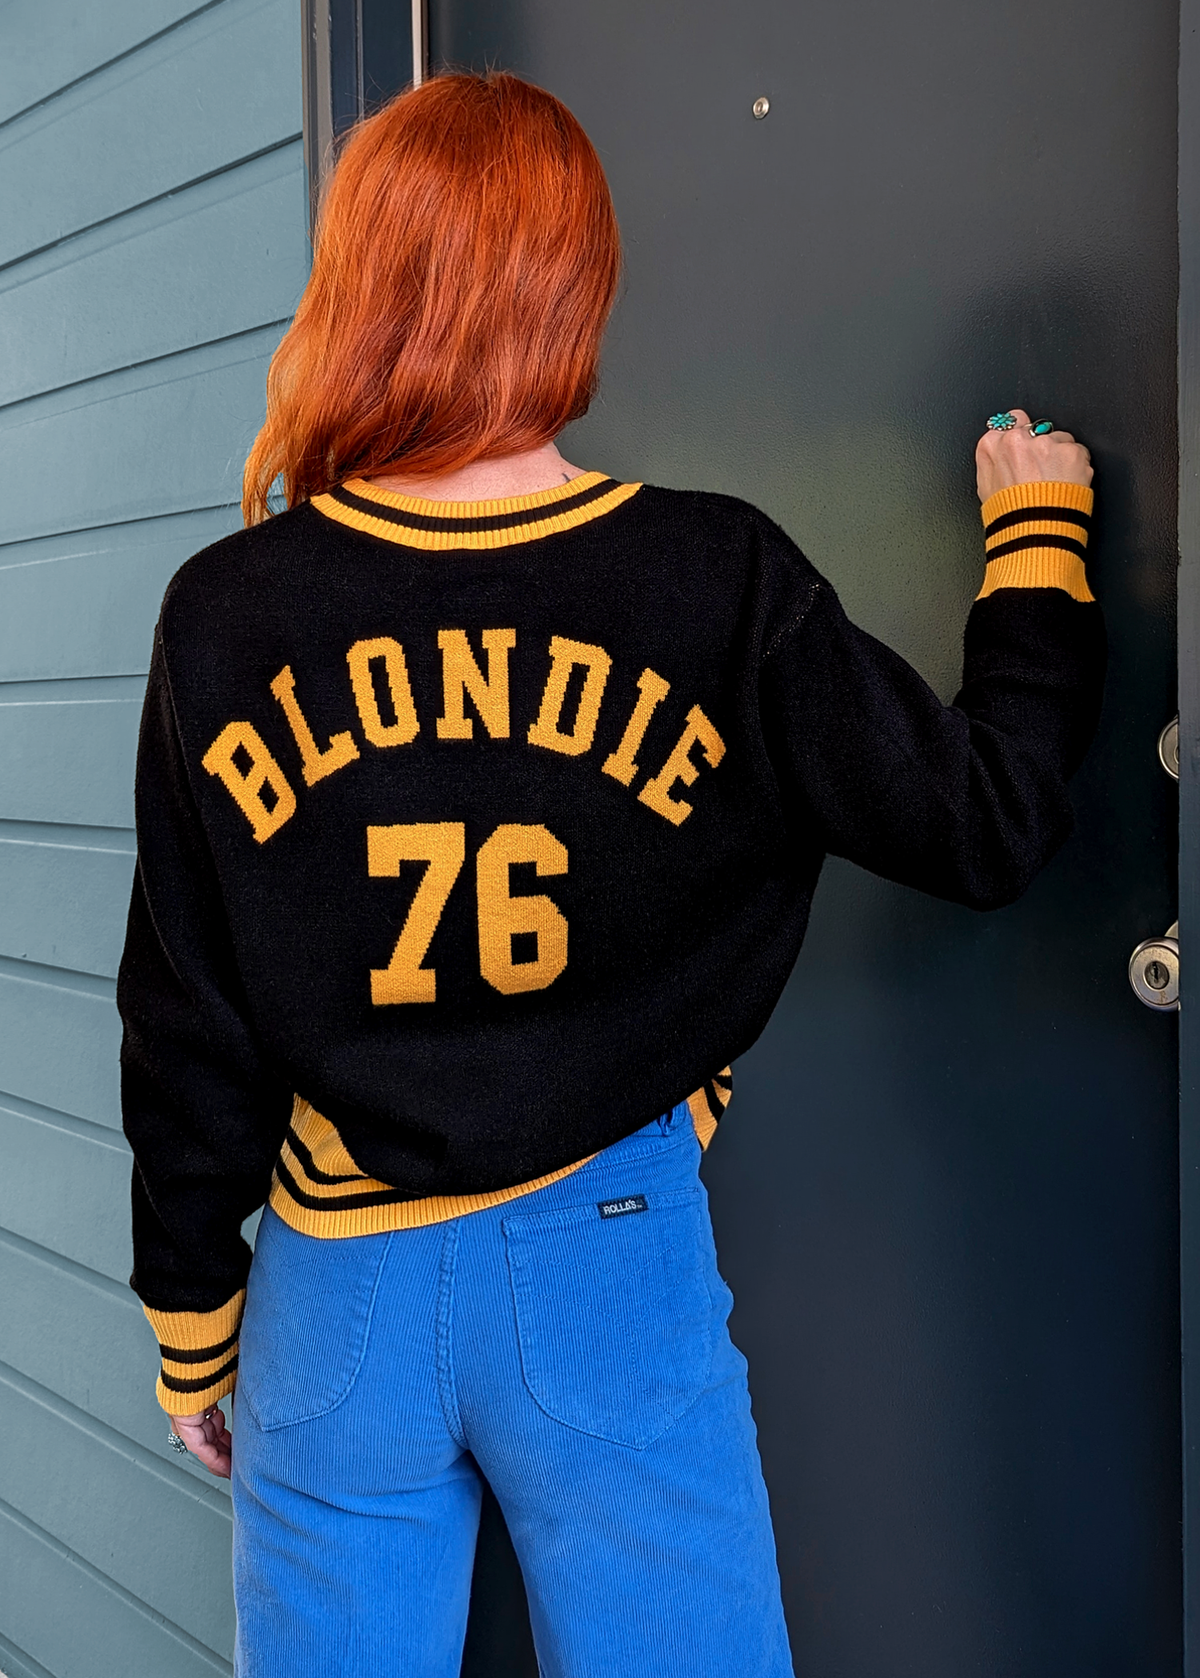 Daydreamer LA Vultures Blondie '76 oversized knit sweater in black and yellow gold 